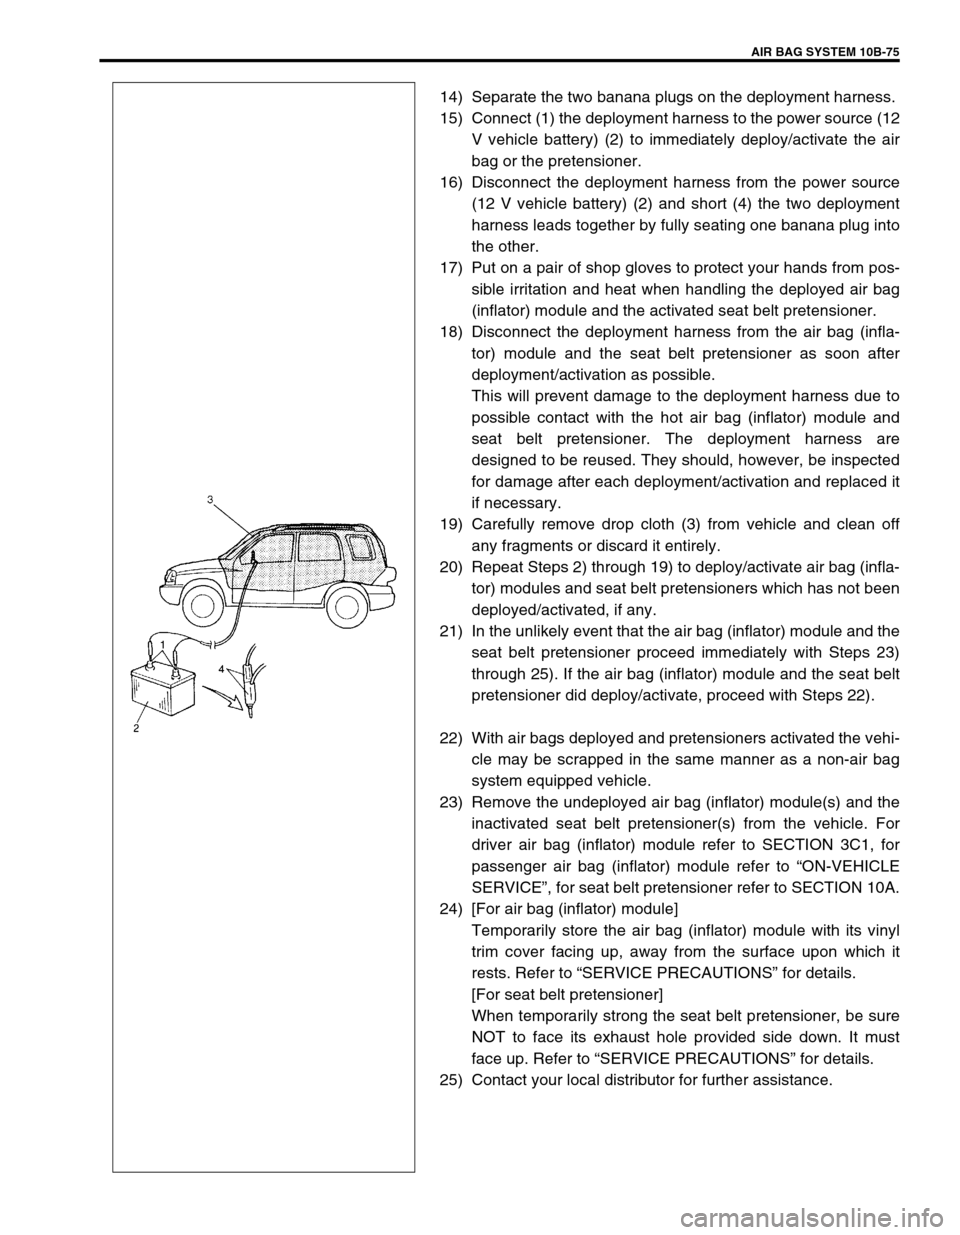 SUZUKI GRAND VITARA 1999 2.G Owners Manual AIR BAG SYSTEM 10B-75
14) Separate the two banana plugs on the deployment harness.
15) Connect (1) the deployment harness to the power source (12
V vehicle battery) (2) to immediately deploy/activate 